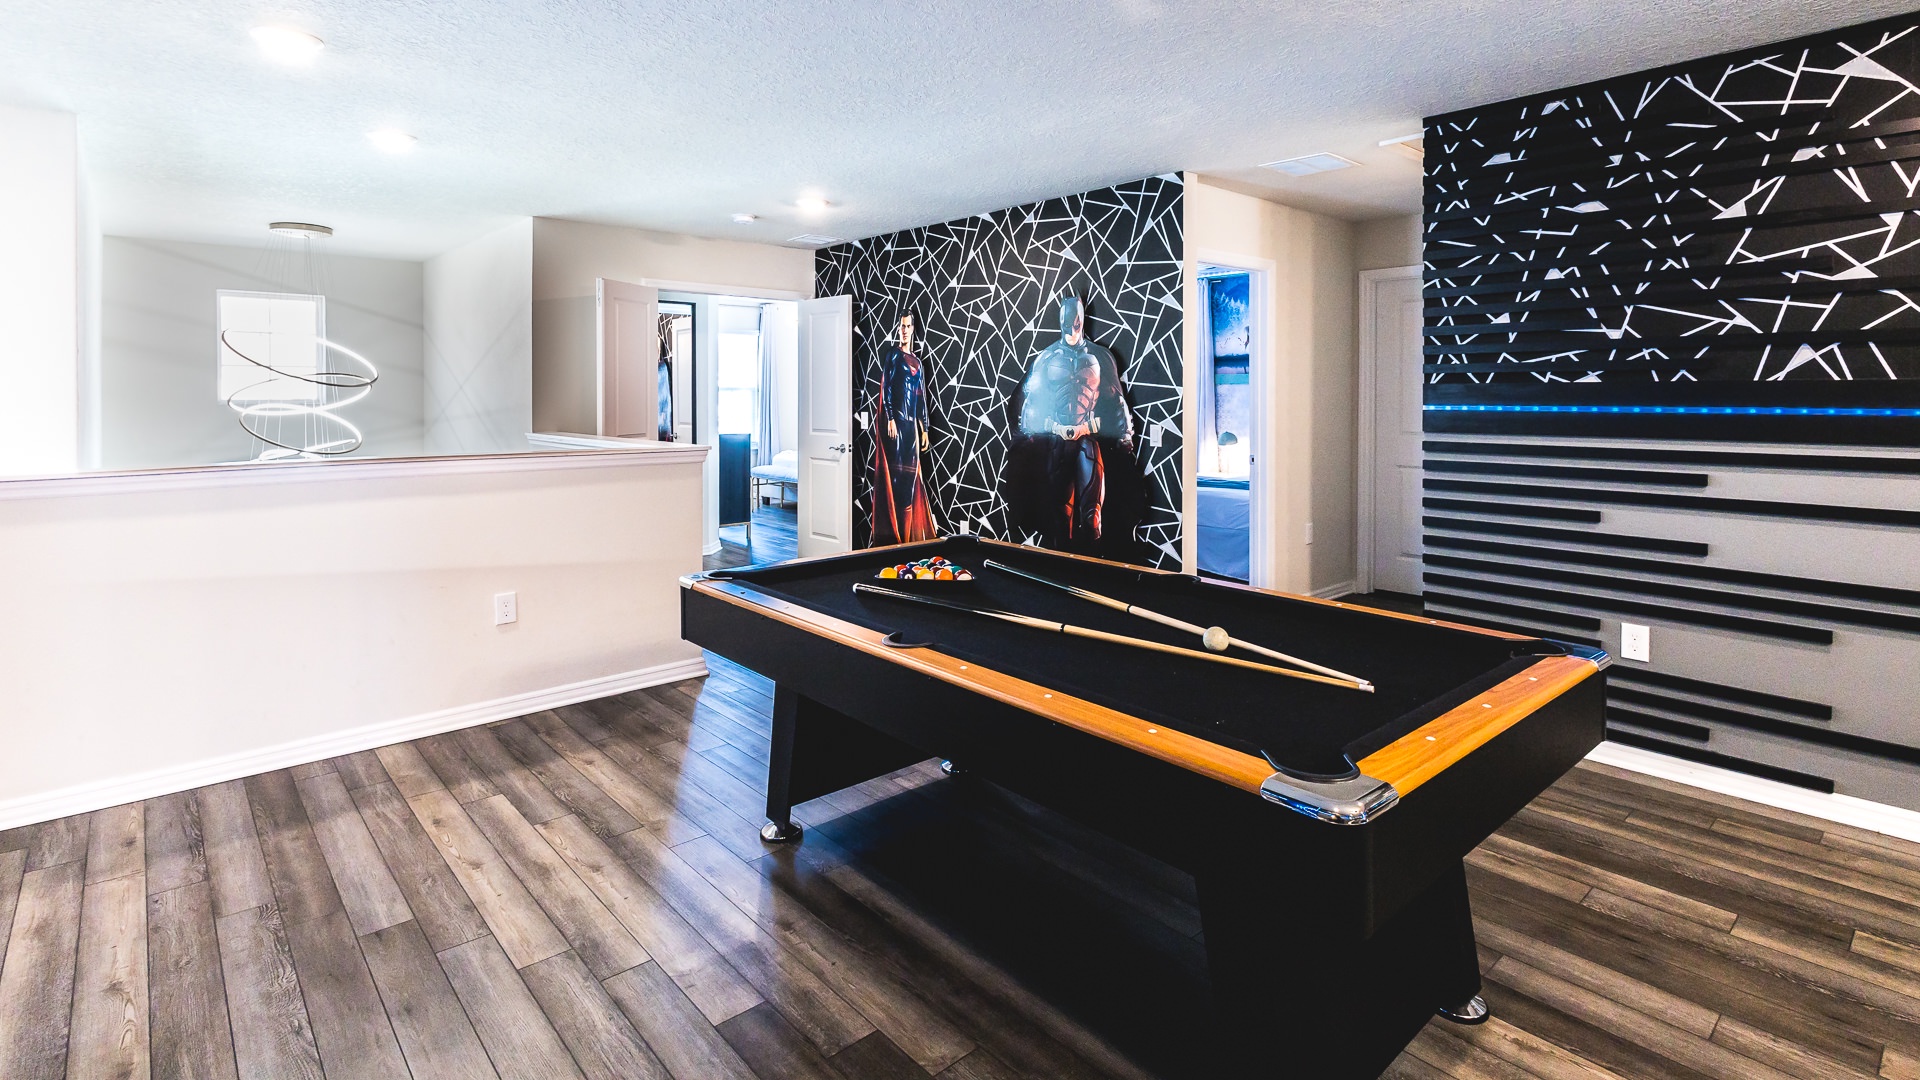 Super Hero game room area with pool table, seating, and Smart TV